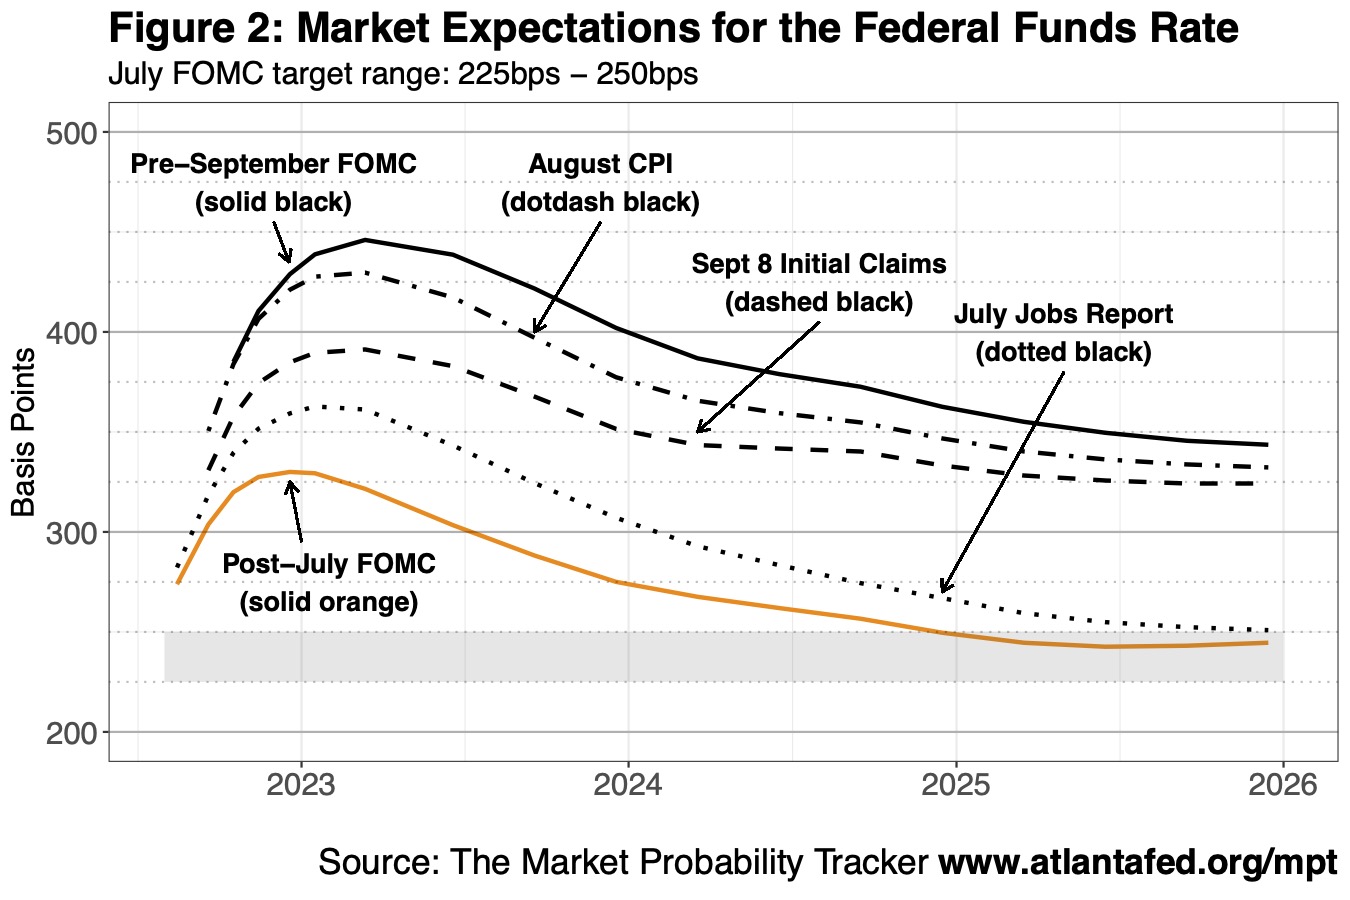 Chart 2 of 3: Market Expecations for the Federal Funds Rate